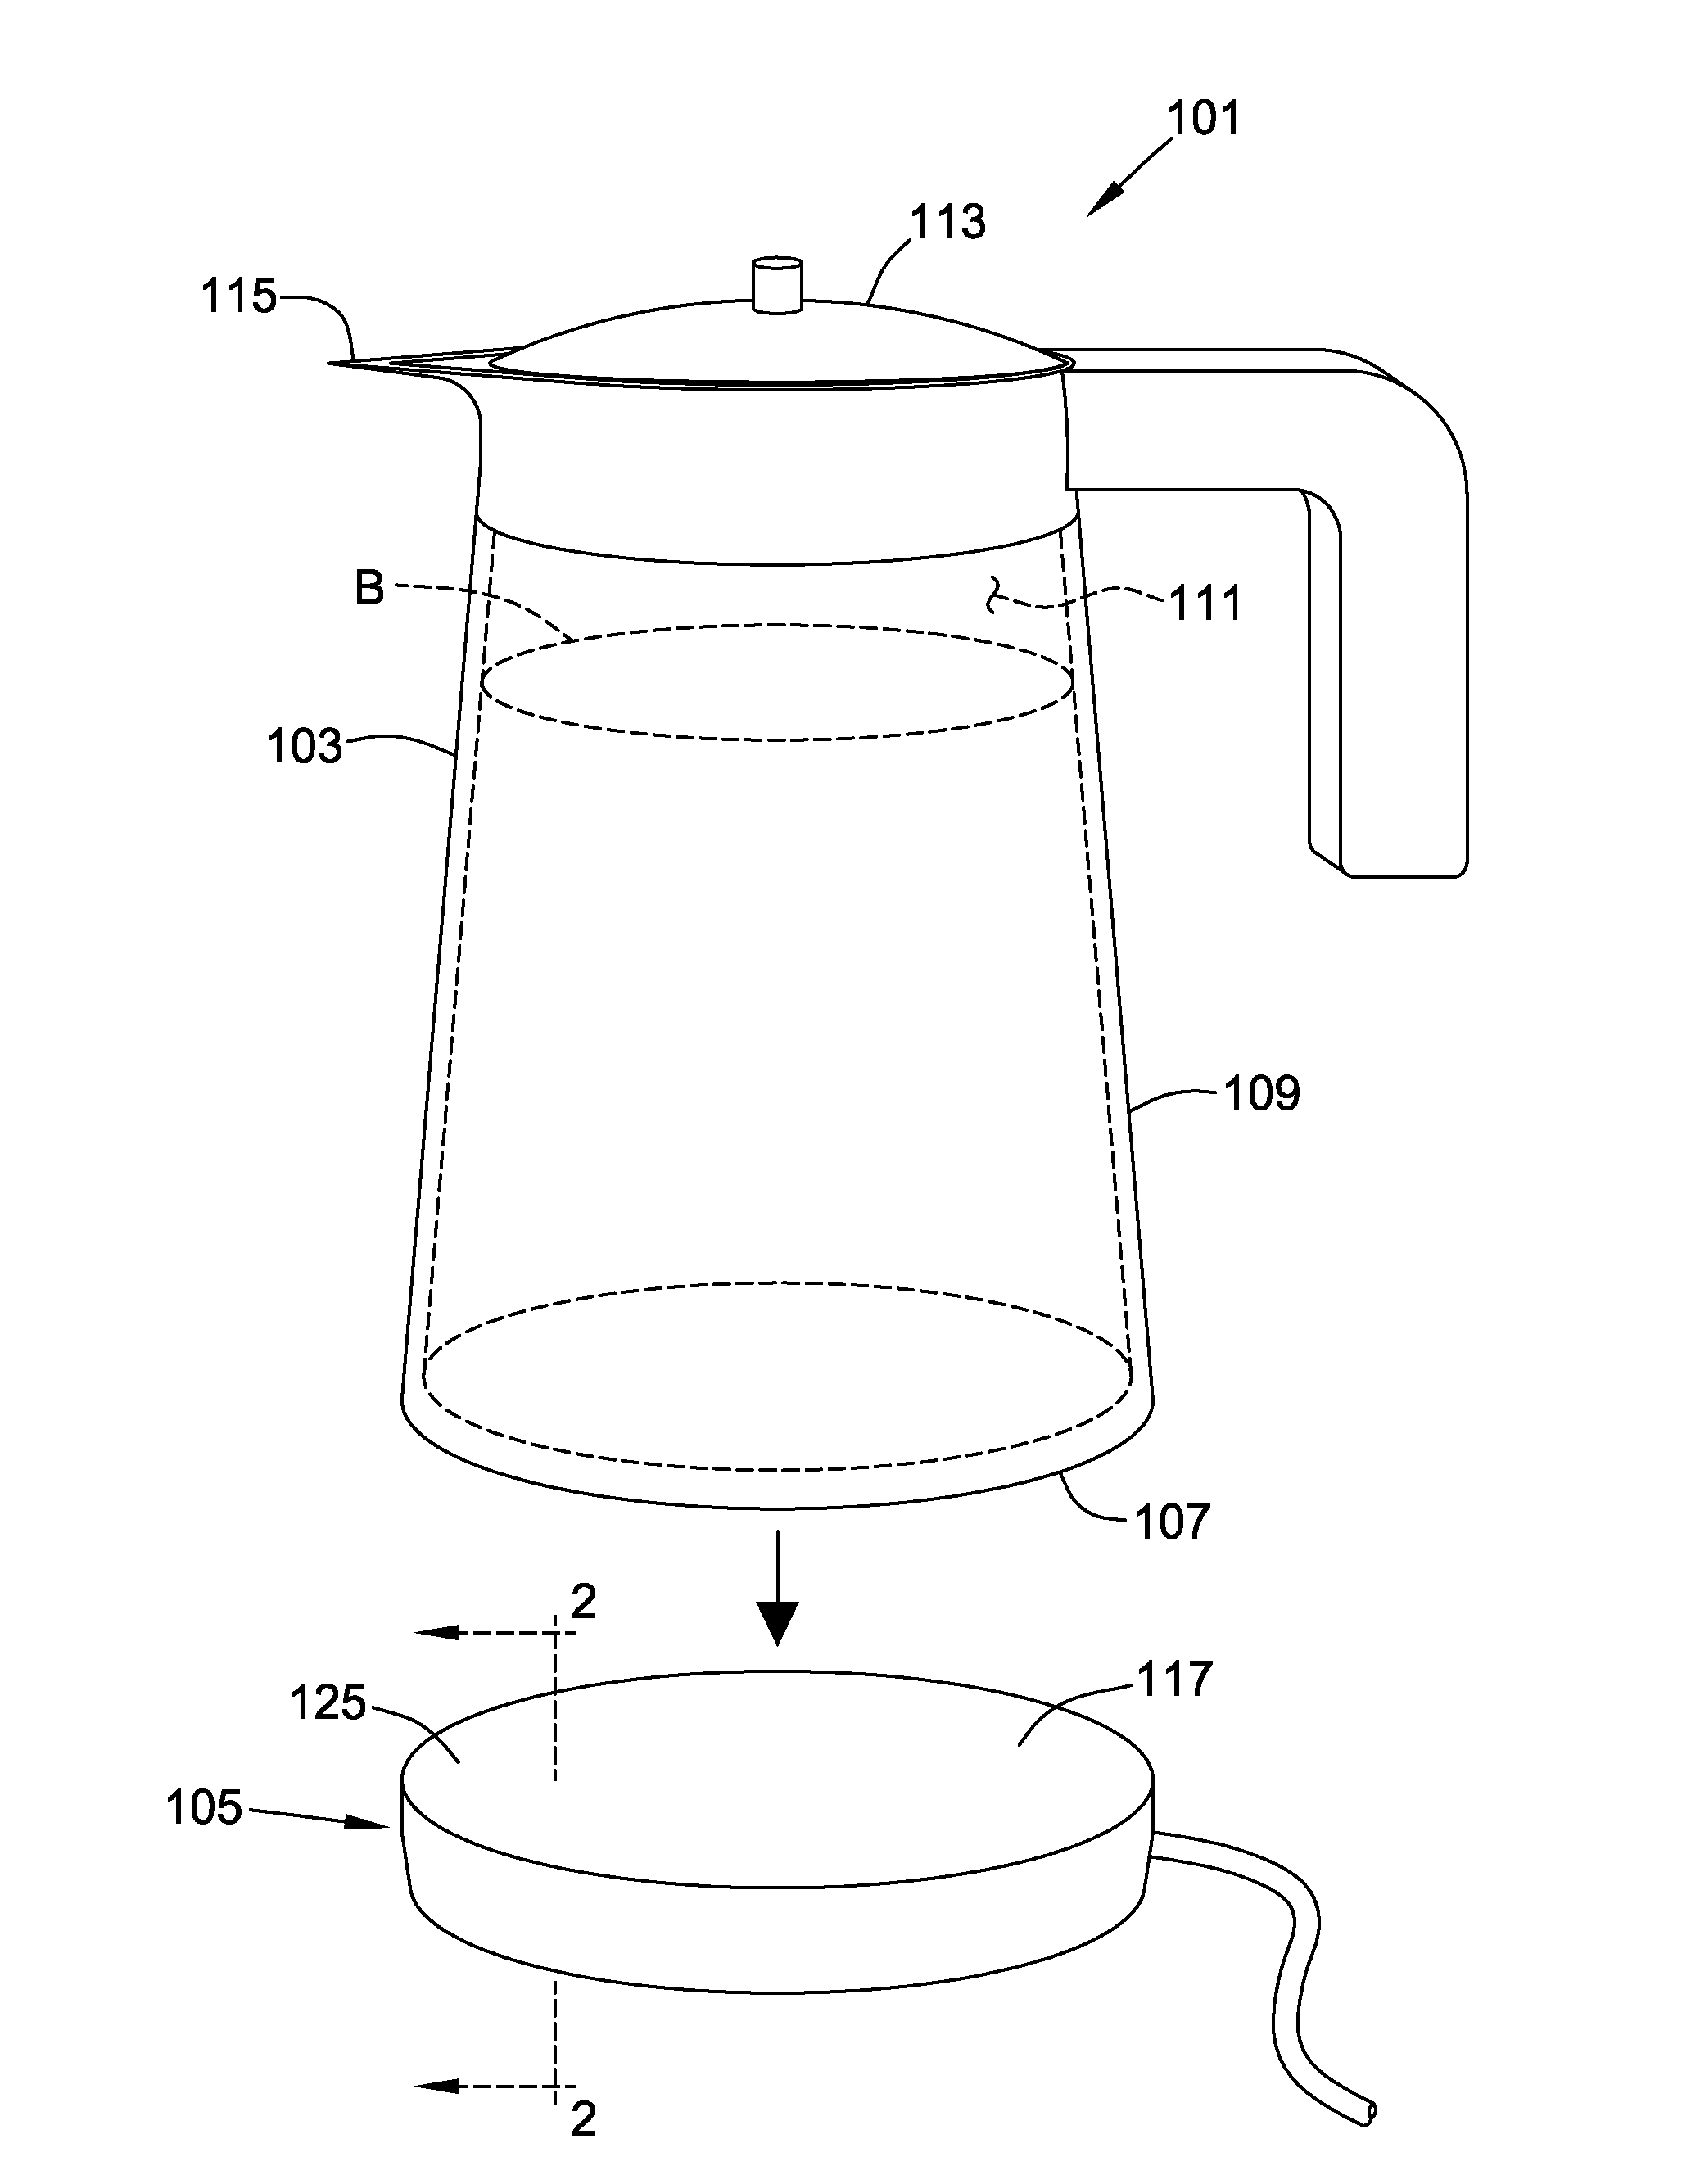 Portable container system for heating a beverage